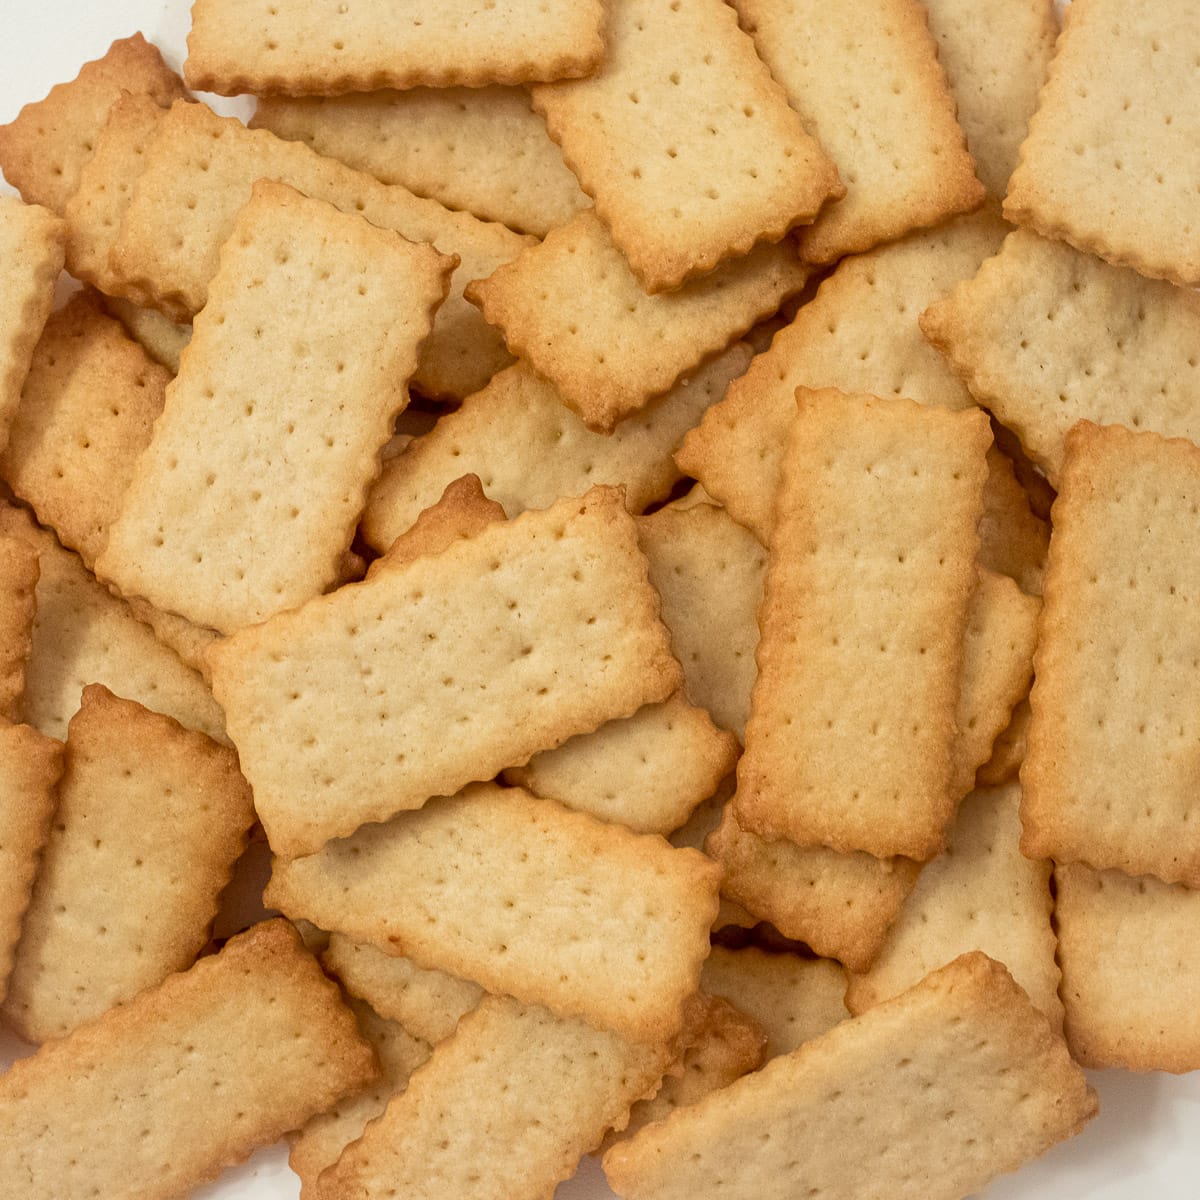 A bunch of French Butter Cookies, Petit Beurre, on a plate.  They are rectangular cookies with holes throughout them and have browned edges